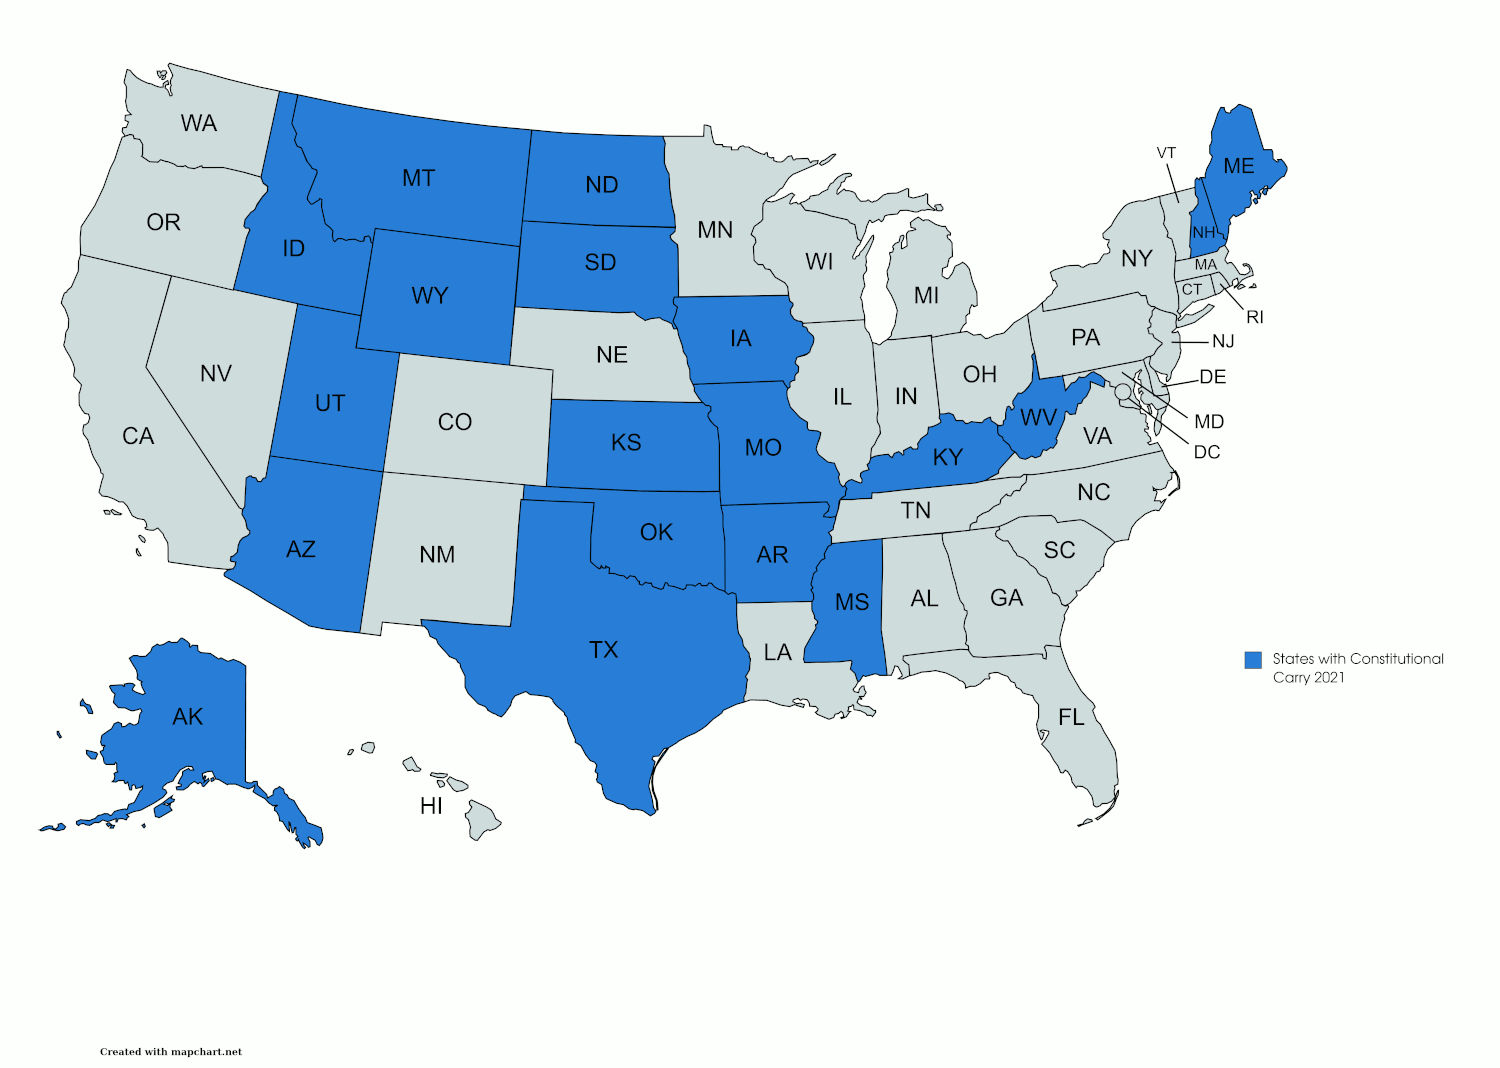 States with Constitutional Carry 2021